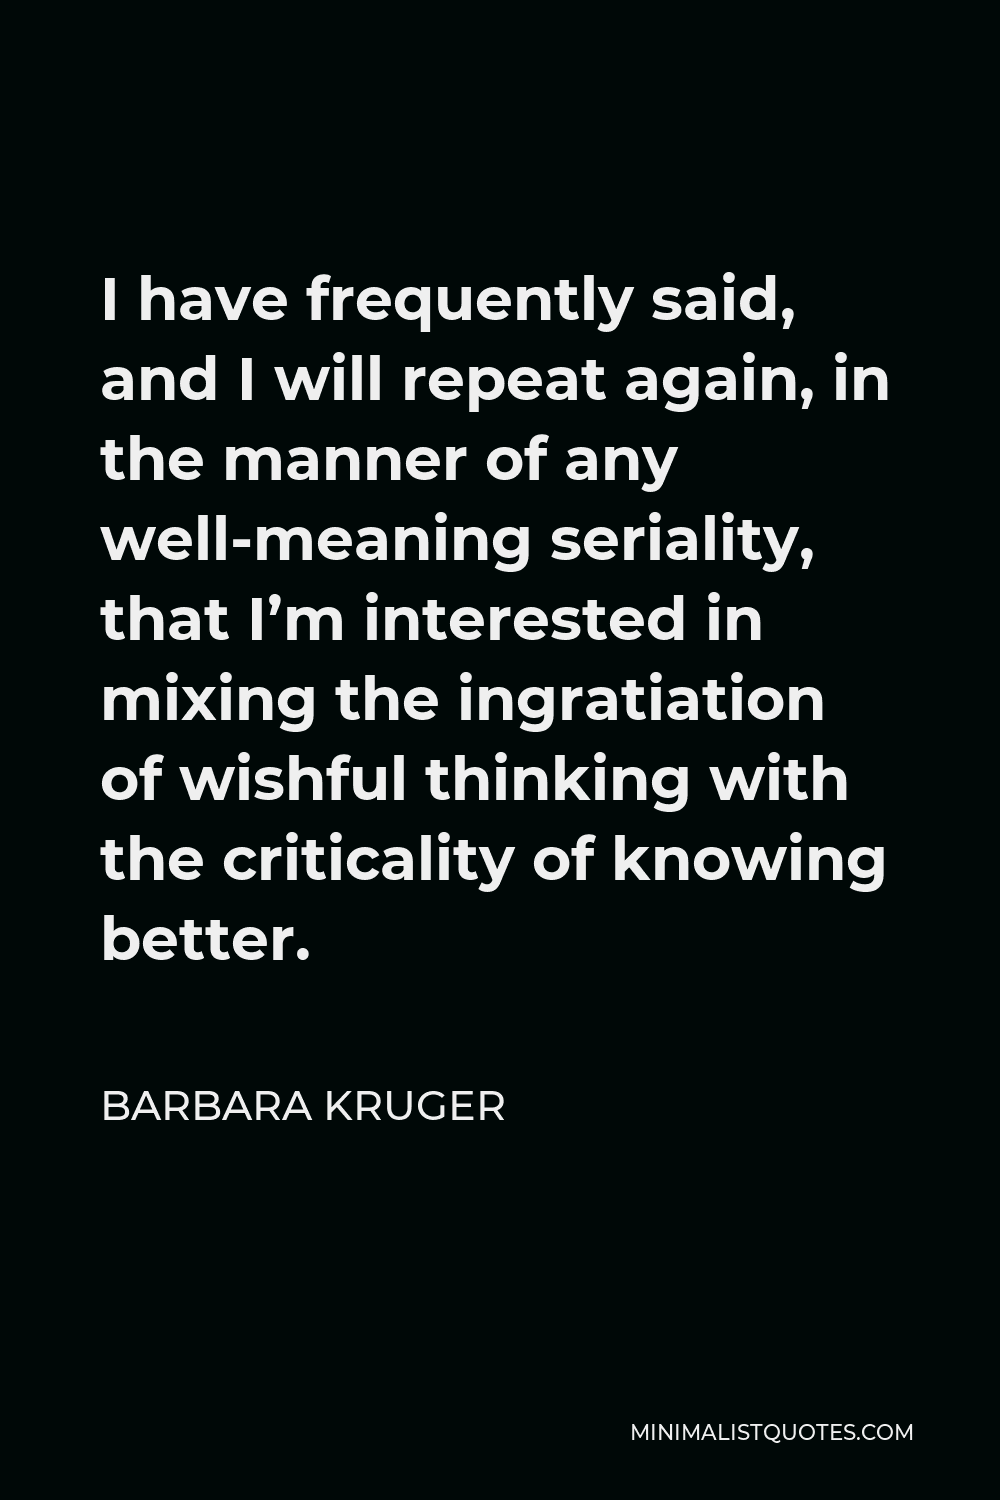 Barbara Kruger Quote - I have frequently said, and I will repeat again, in the manner of any well-meaning seriality, that I’m interested in mixing the ingratiation of wishful thinking with the criticality of knowing better.